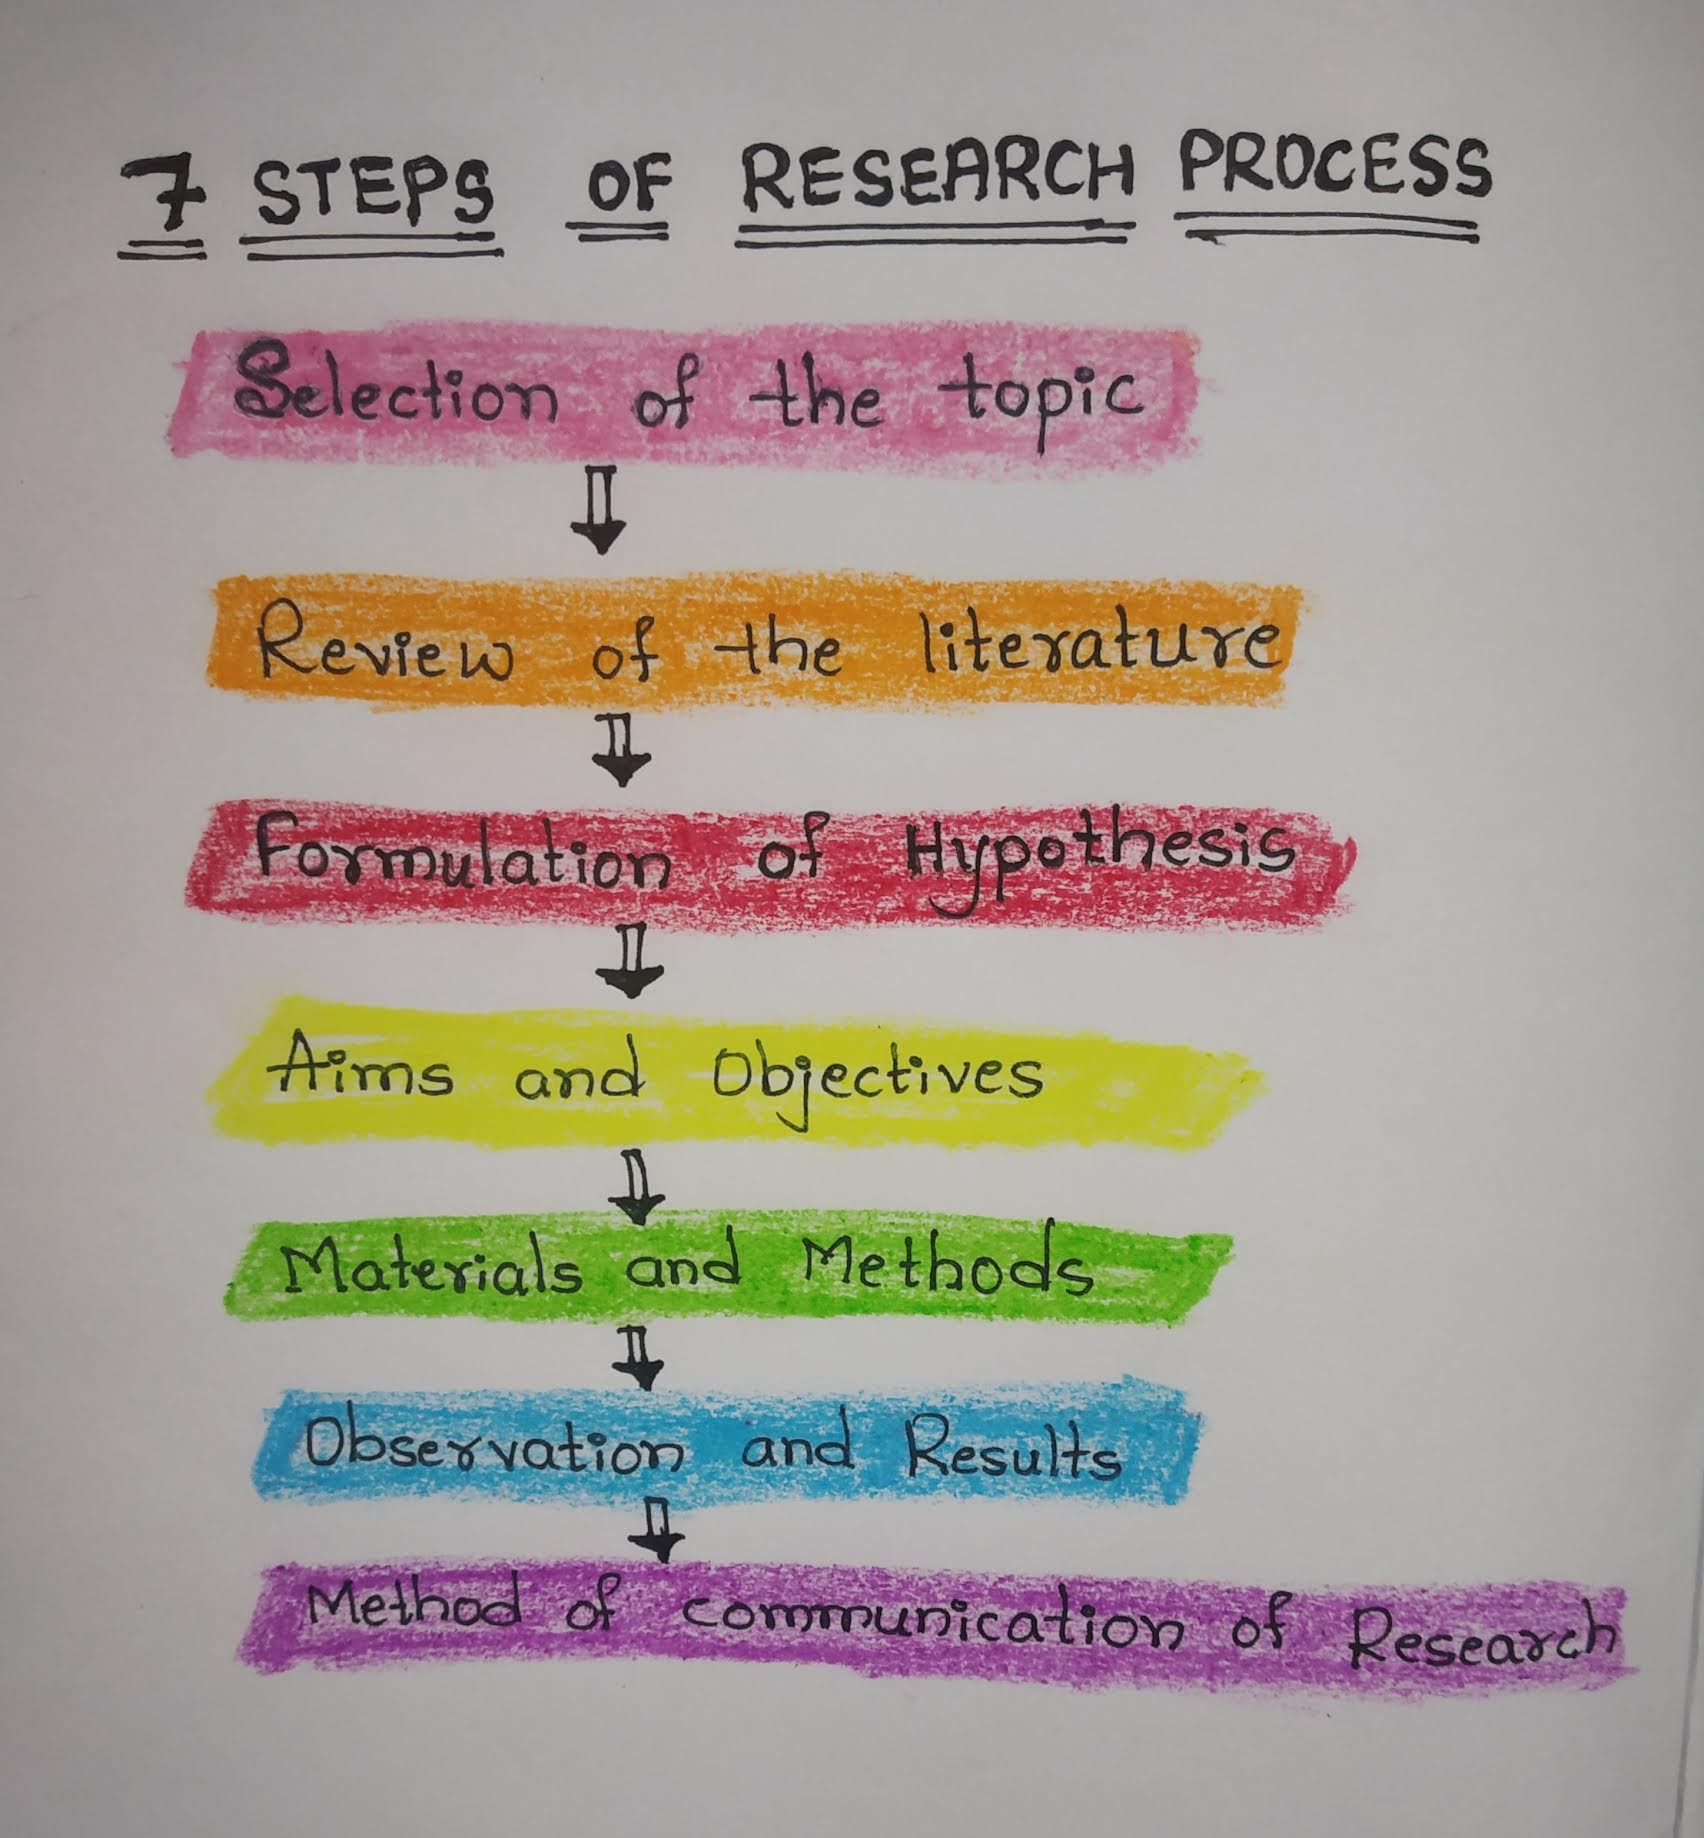 7-steps-of-research-process-research-and-stat-notes-teachmint